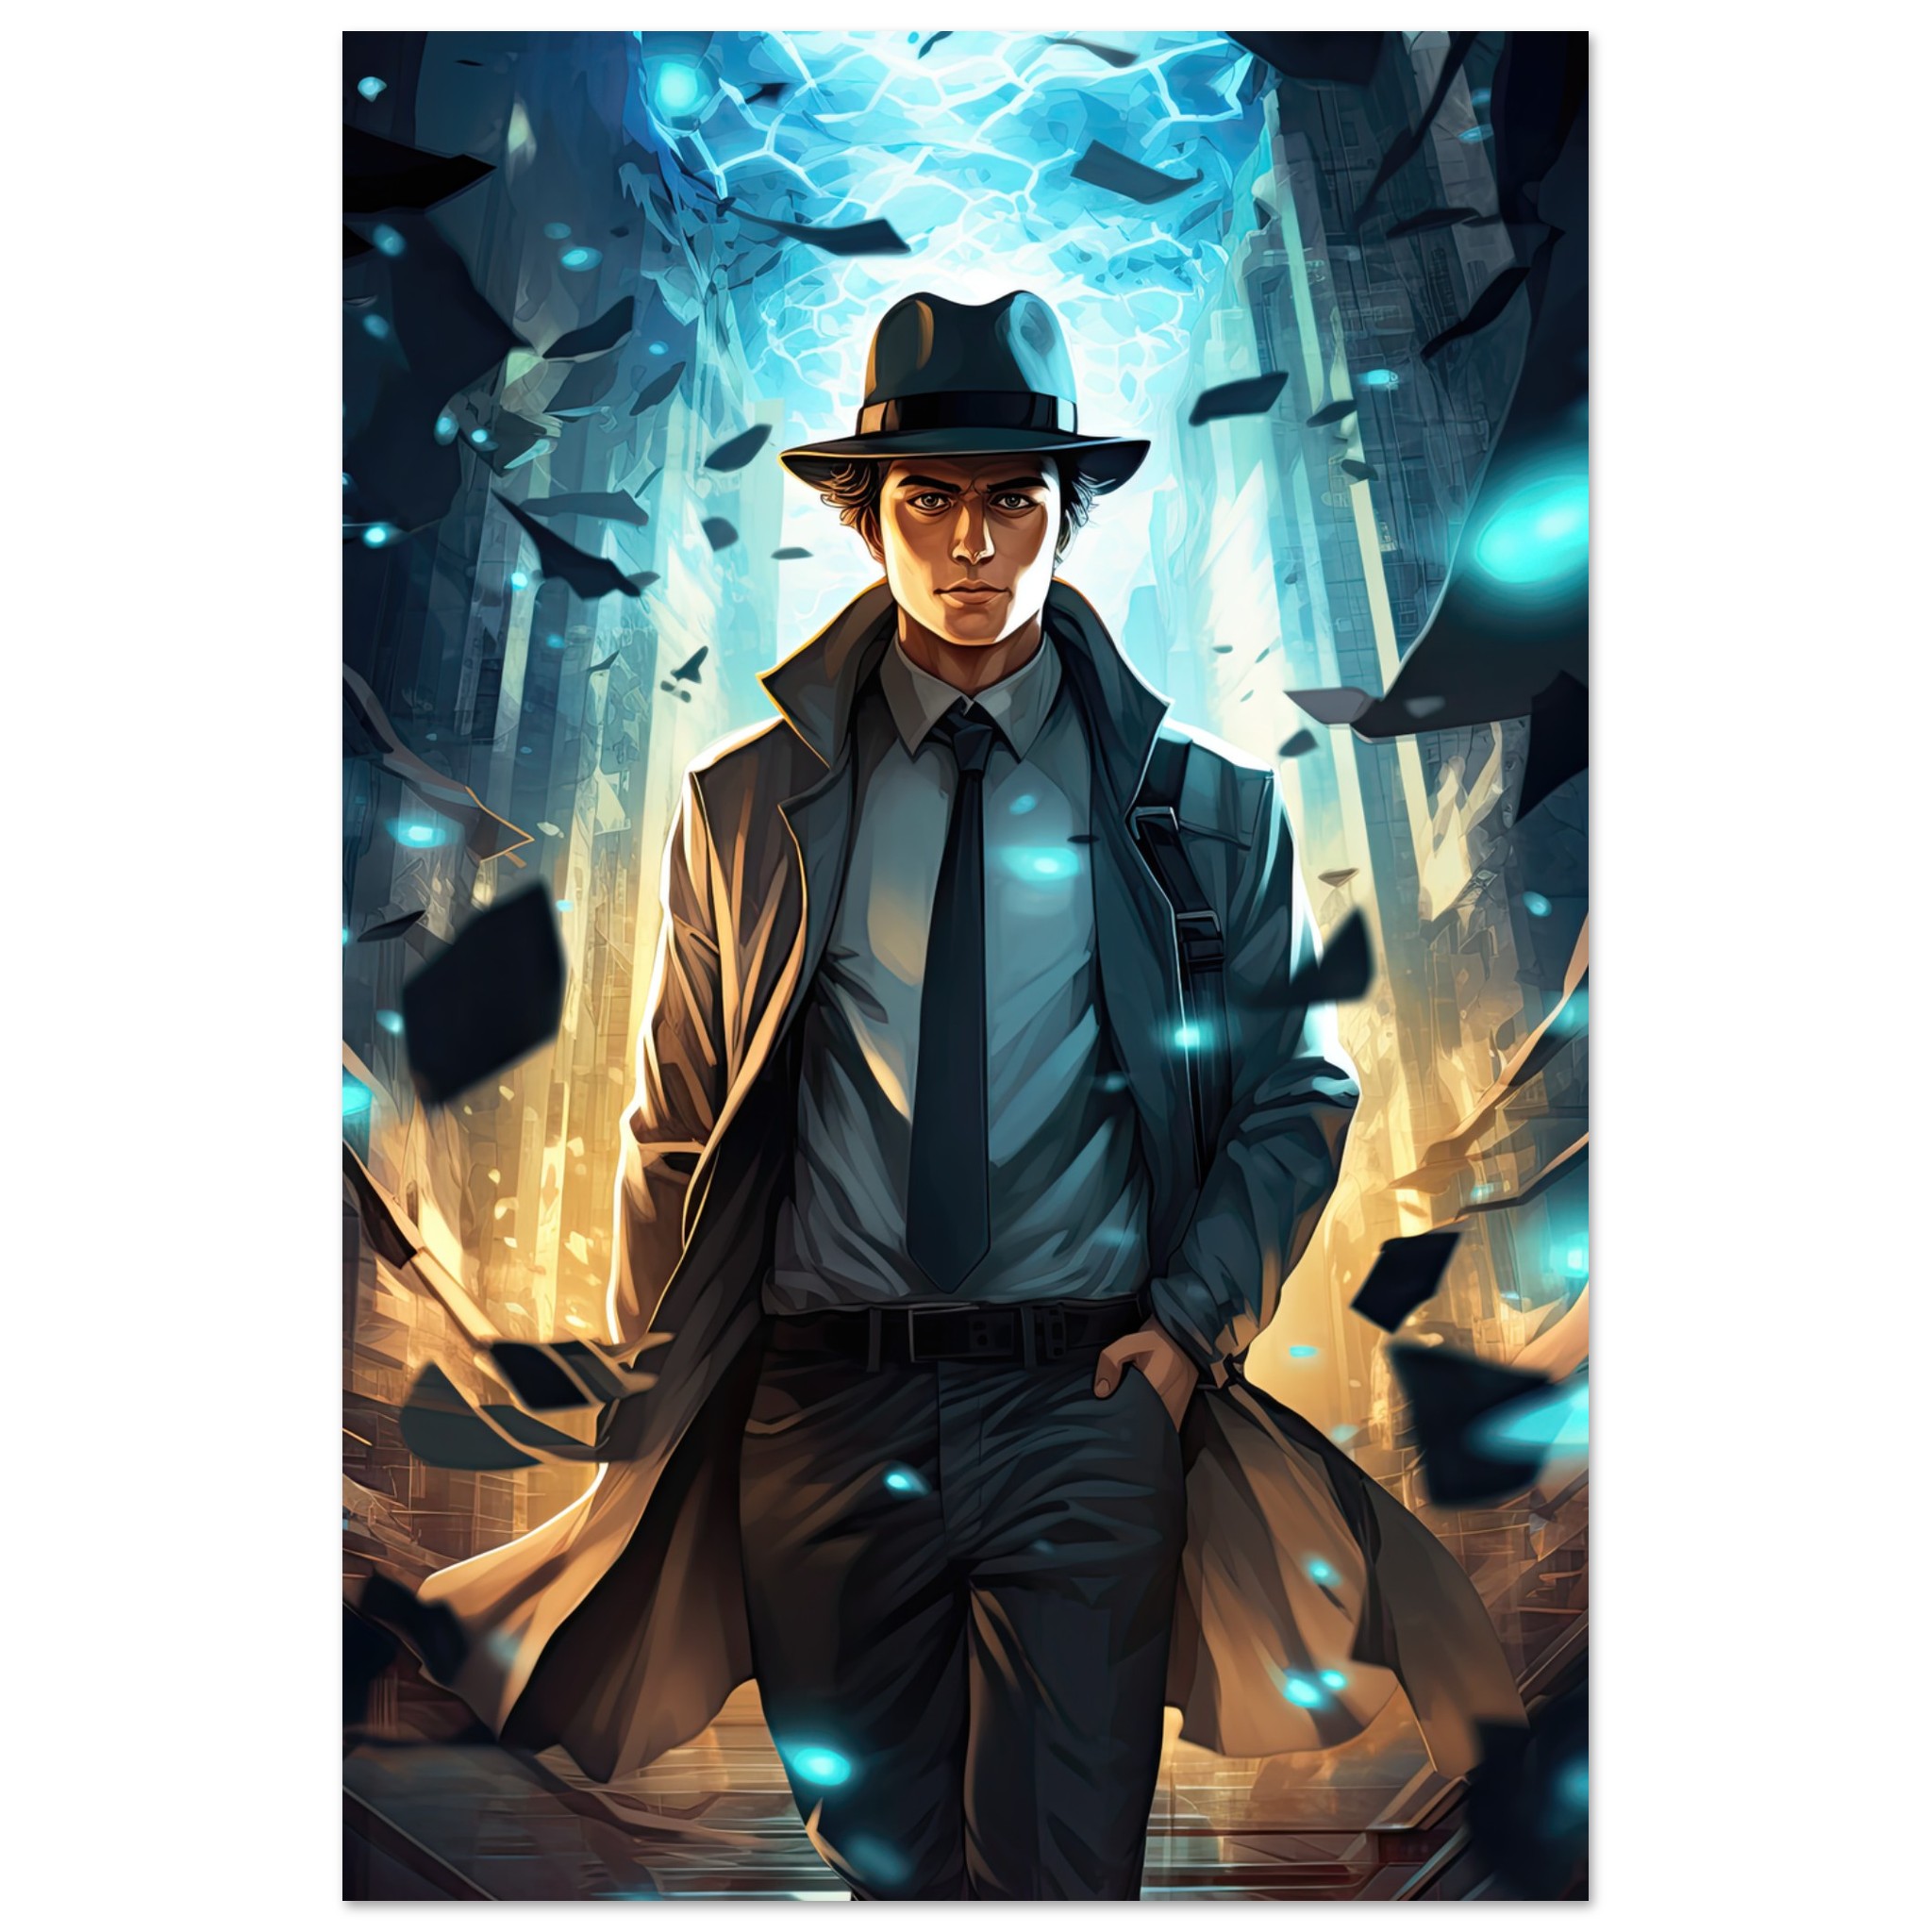 Dimension Hopping Detective Poster – 40×60 cm / 16×24″